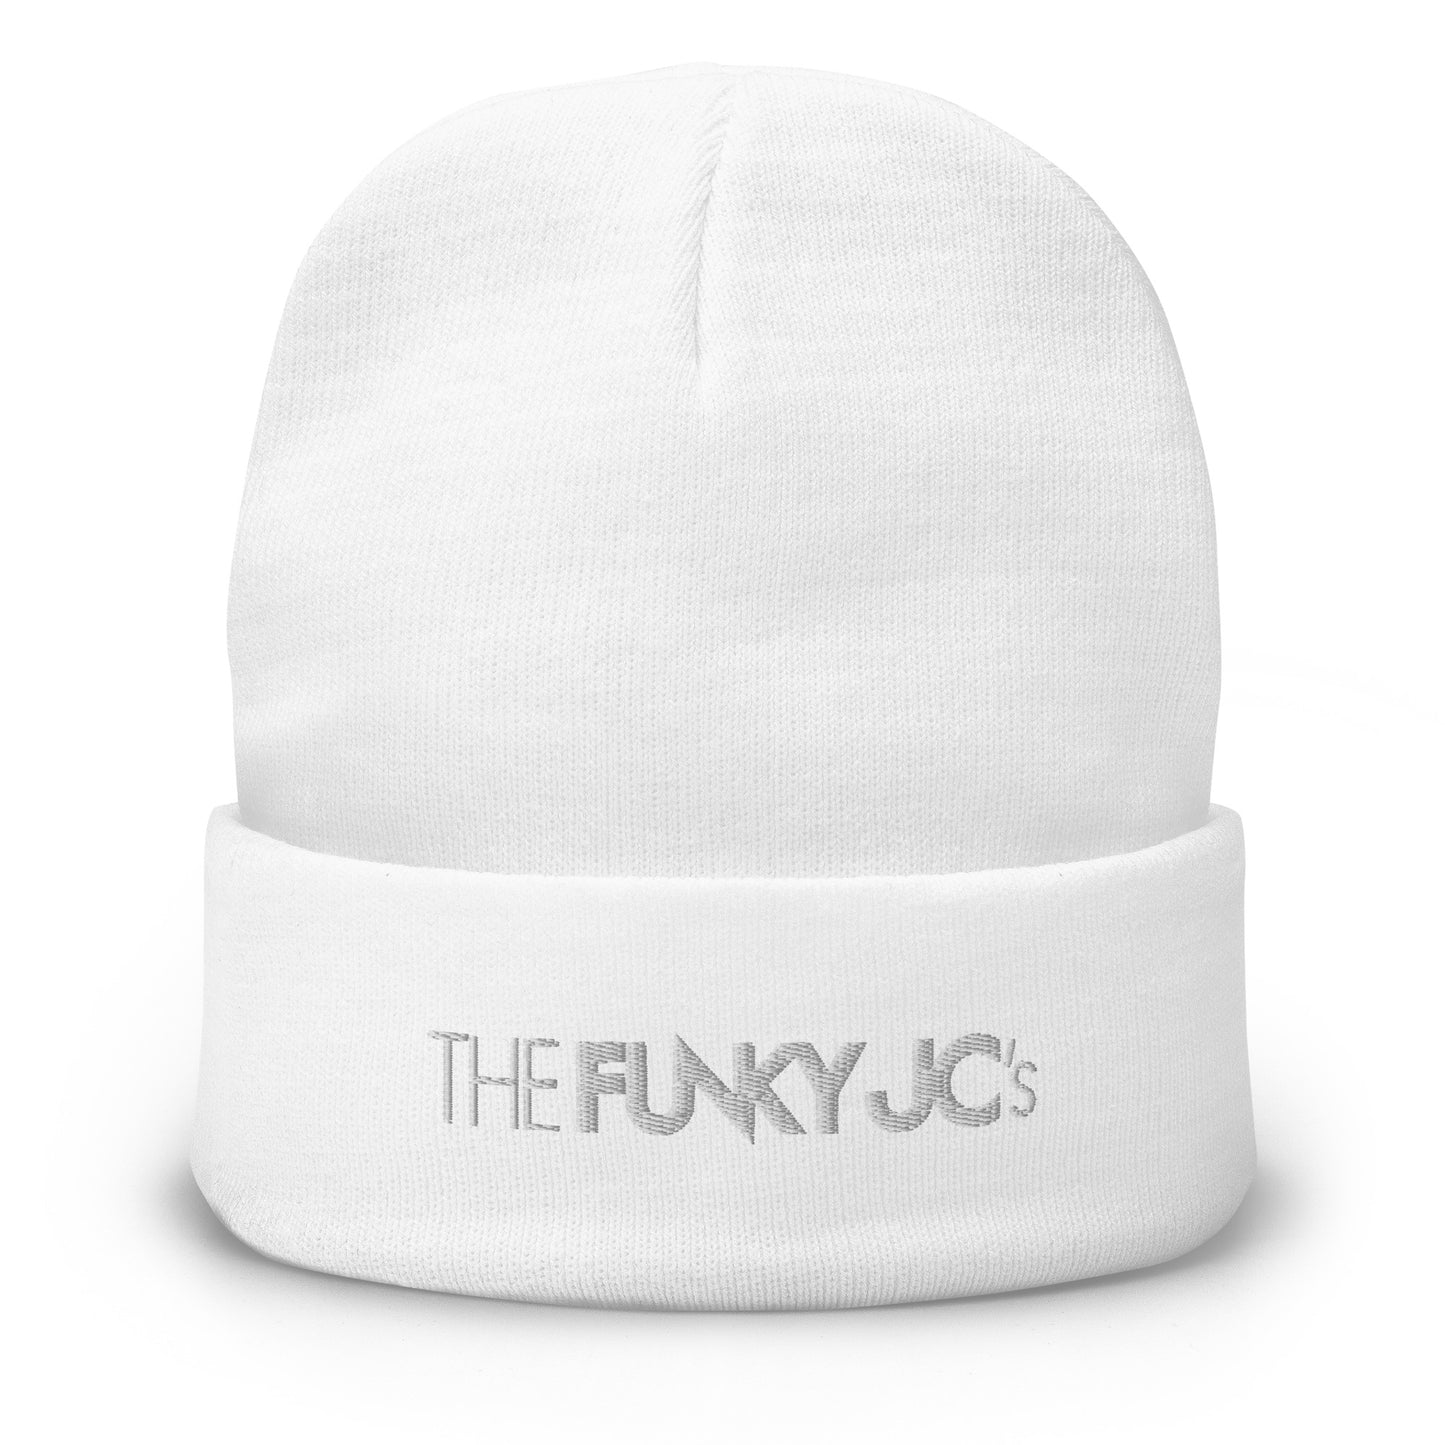 The Funky Jcs Embroidered Beanie